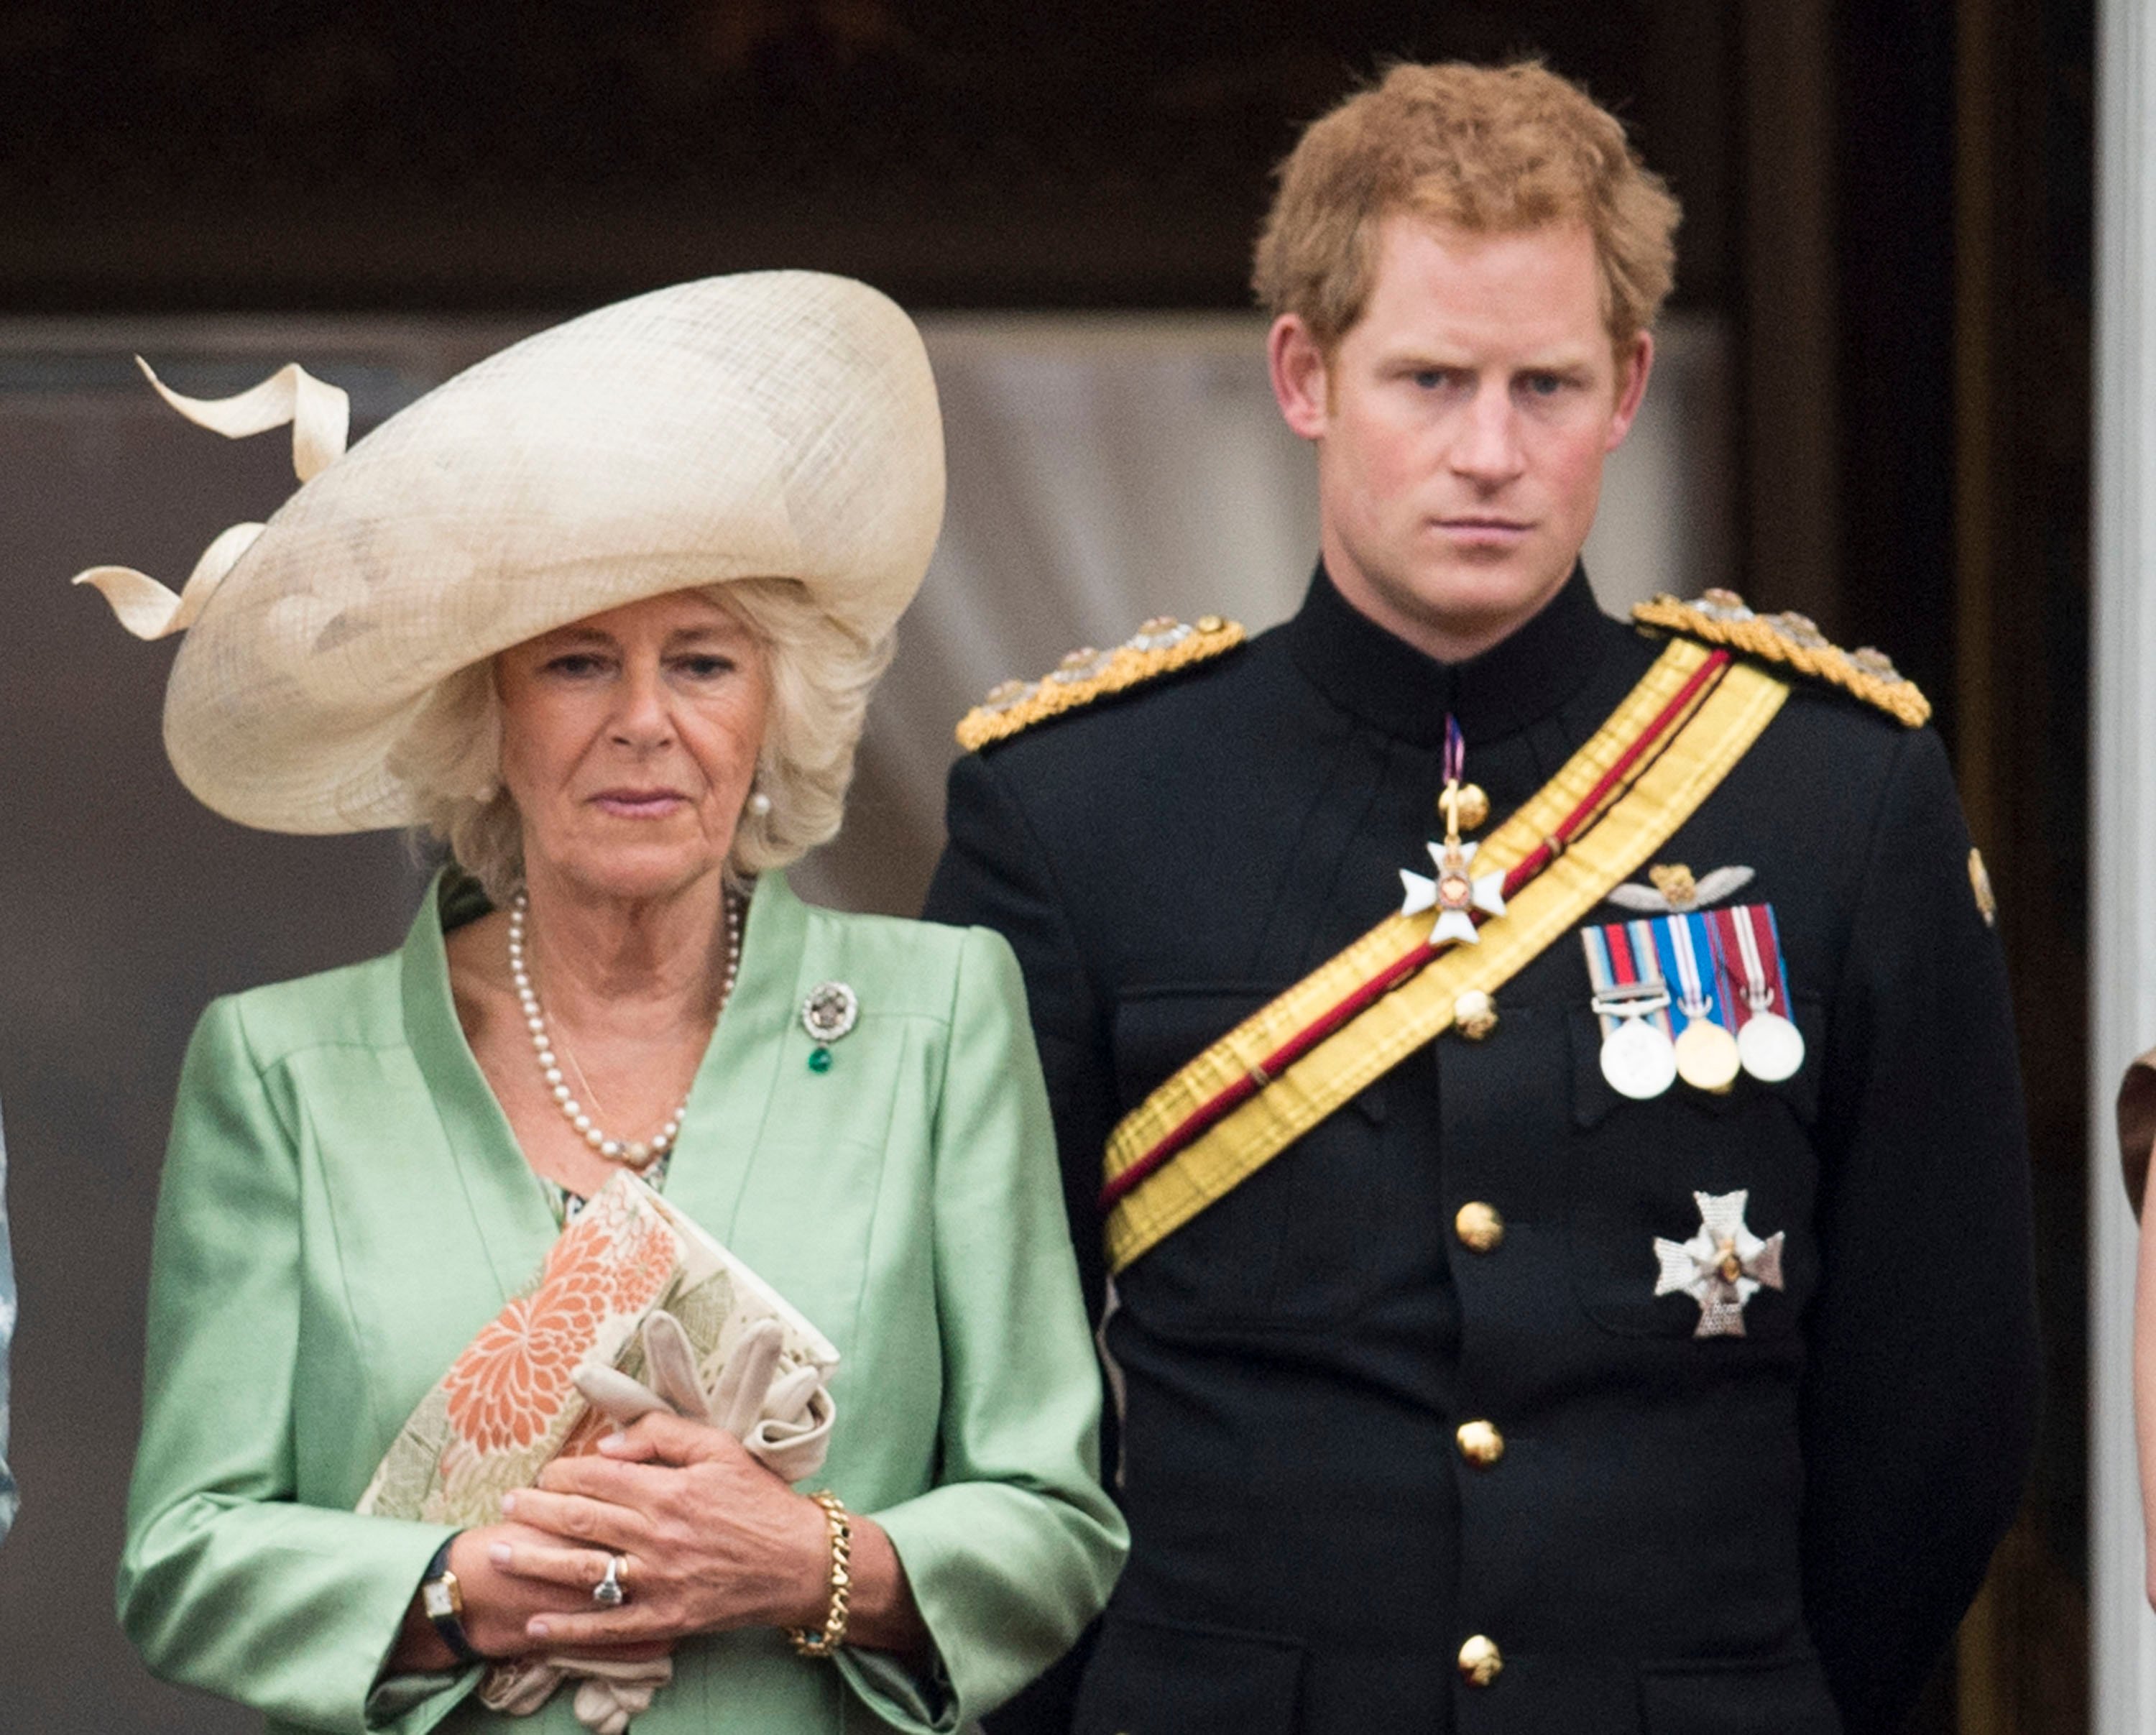 Camilla Parker Bowles and Prince Harry stand next to each other during the Trooping The Colour ceremony at Buckingham Palace in 2015.